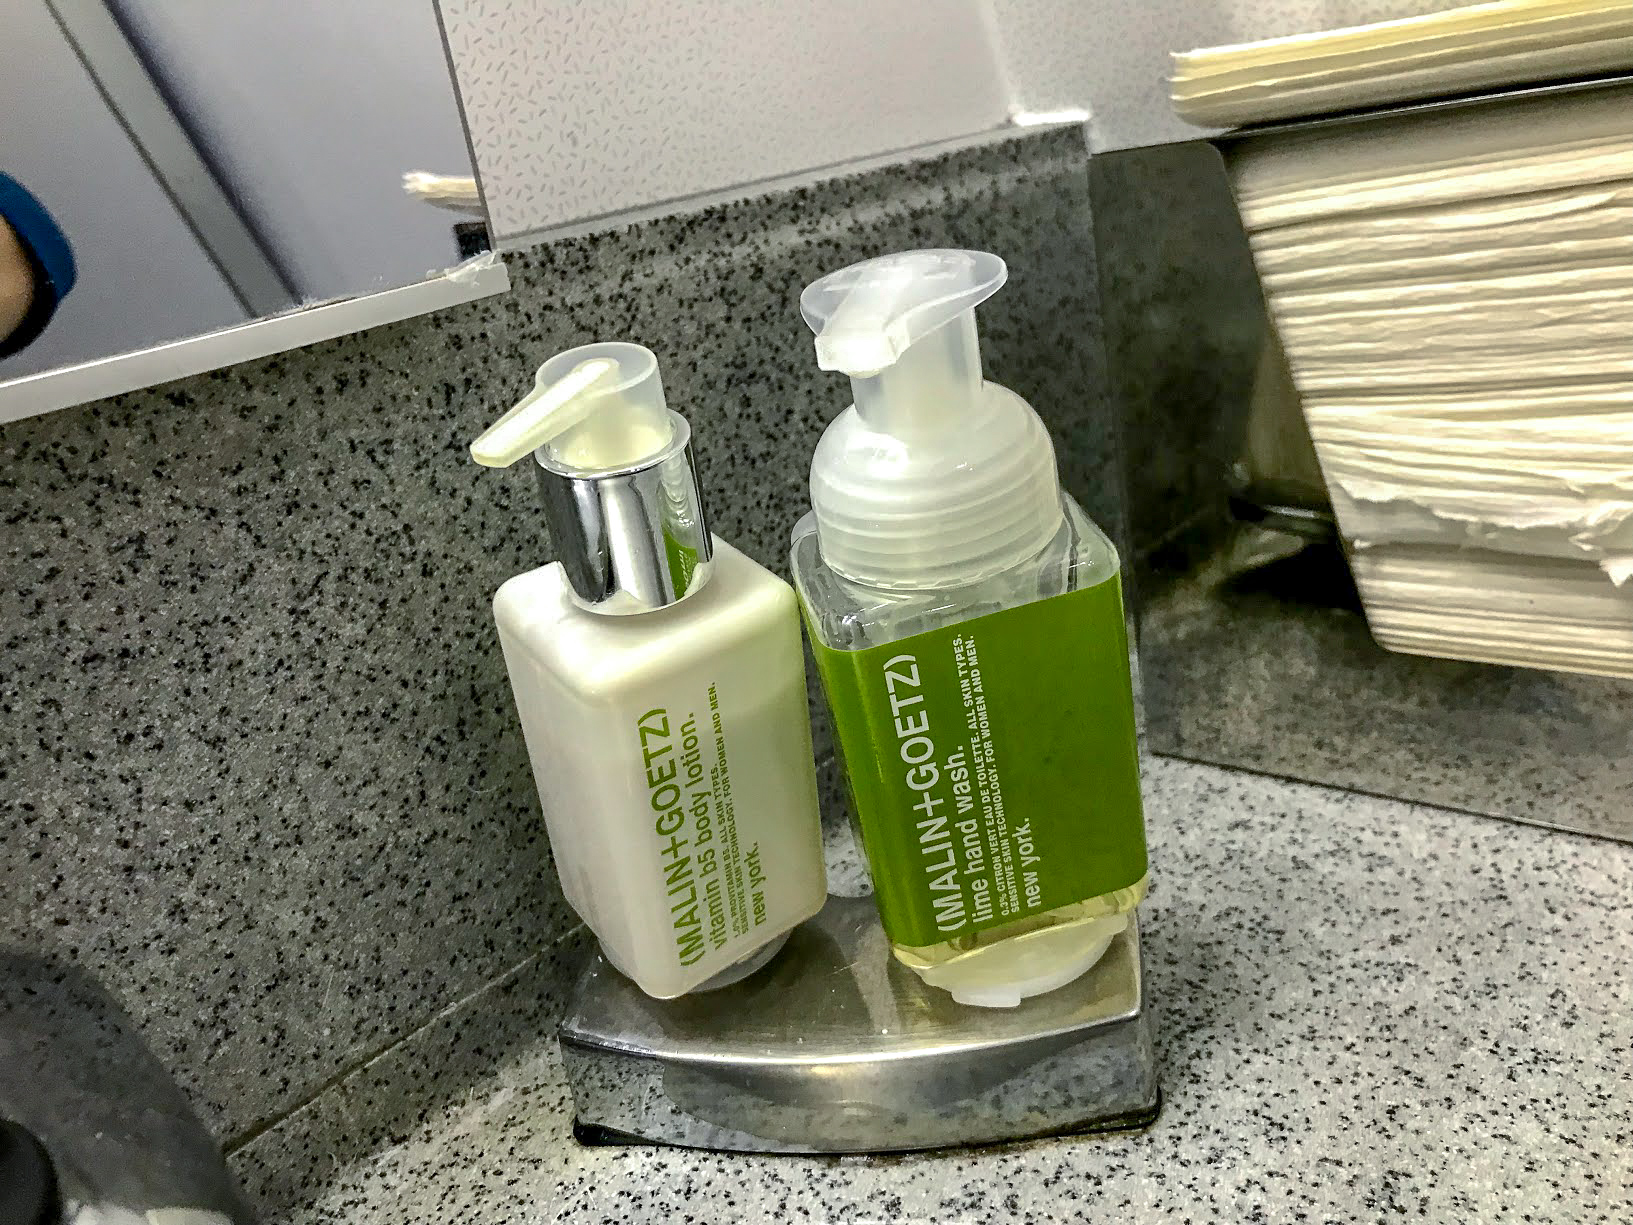 MALIN+GOETZ body lotion and hand wash in a Delta Air Lines Boeing 767 bathroom